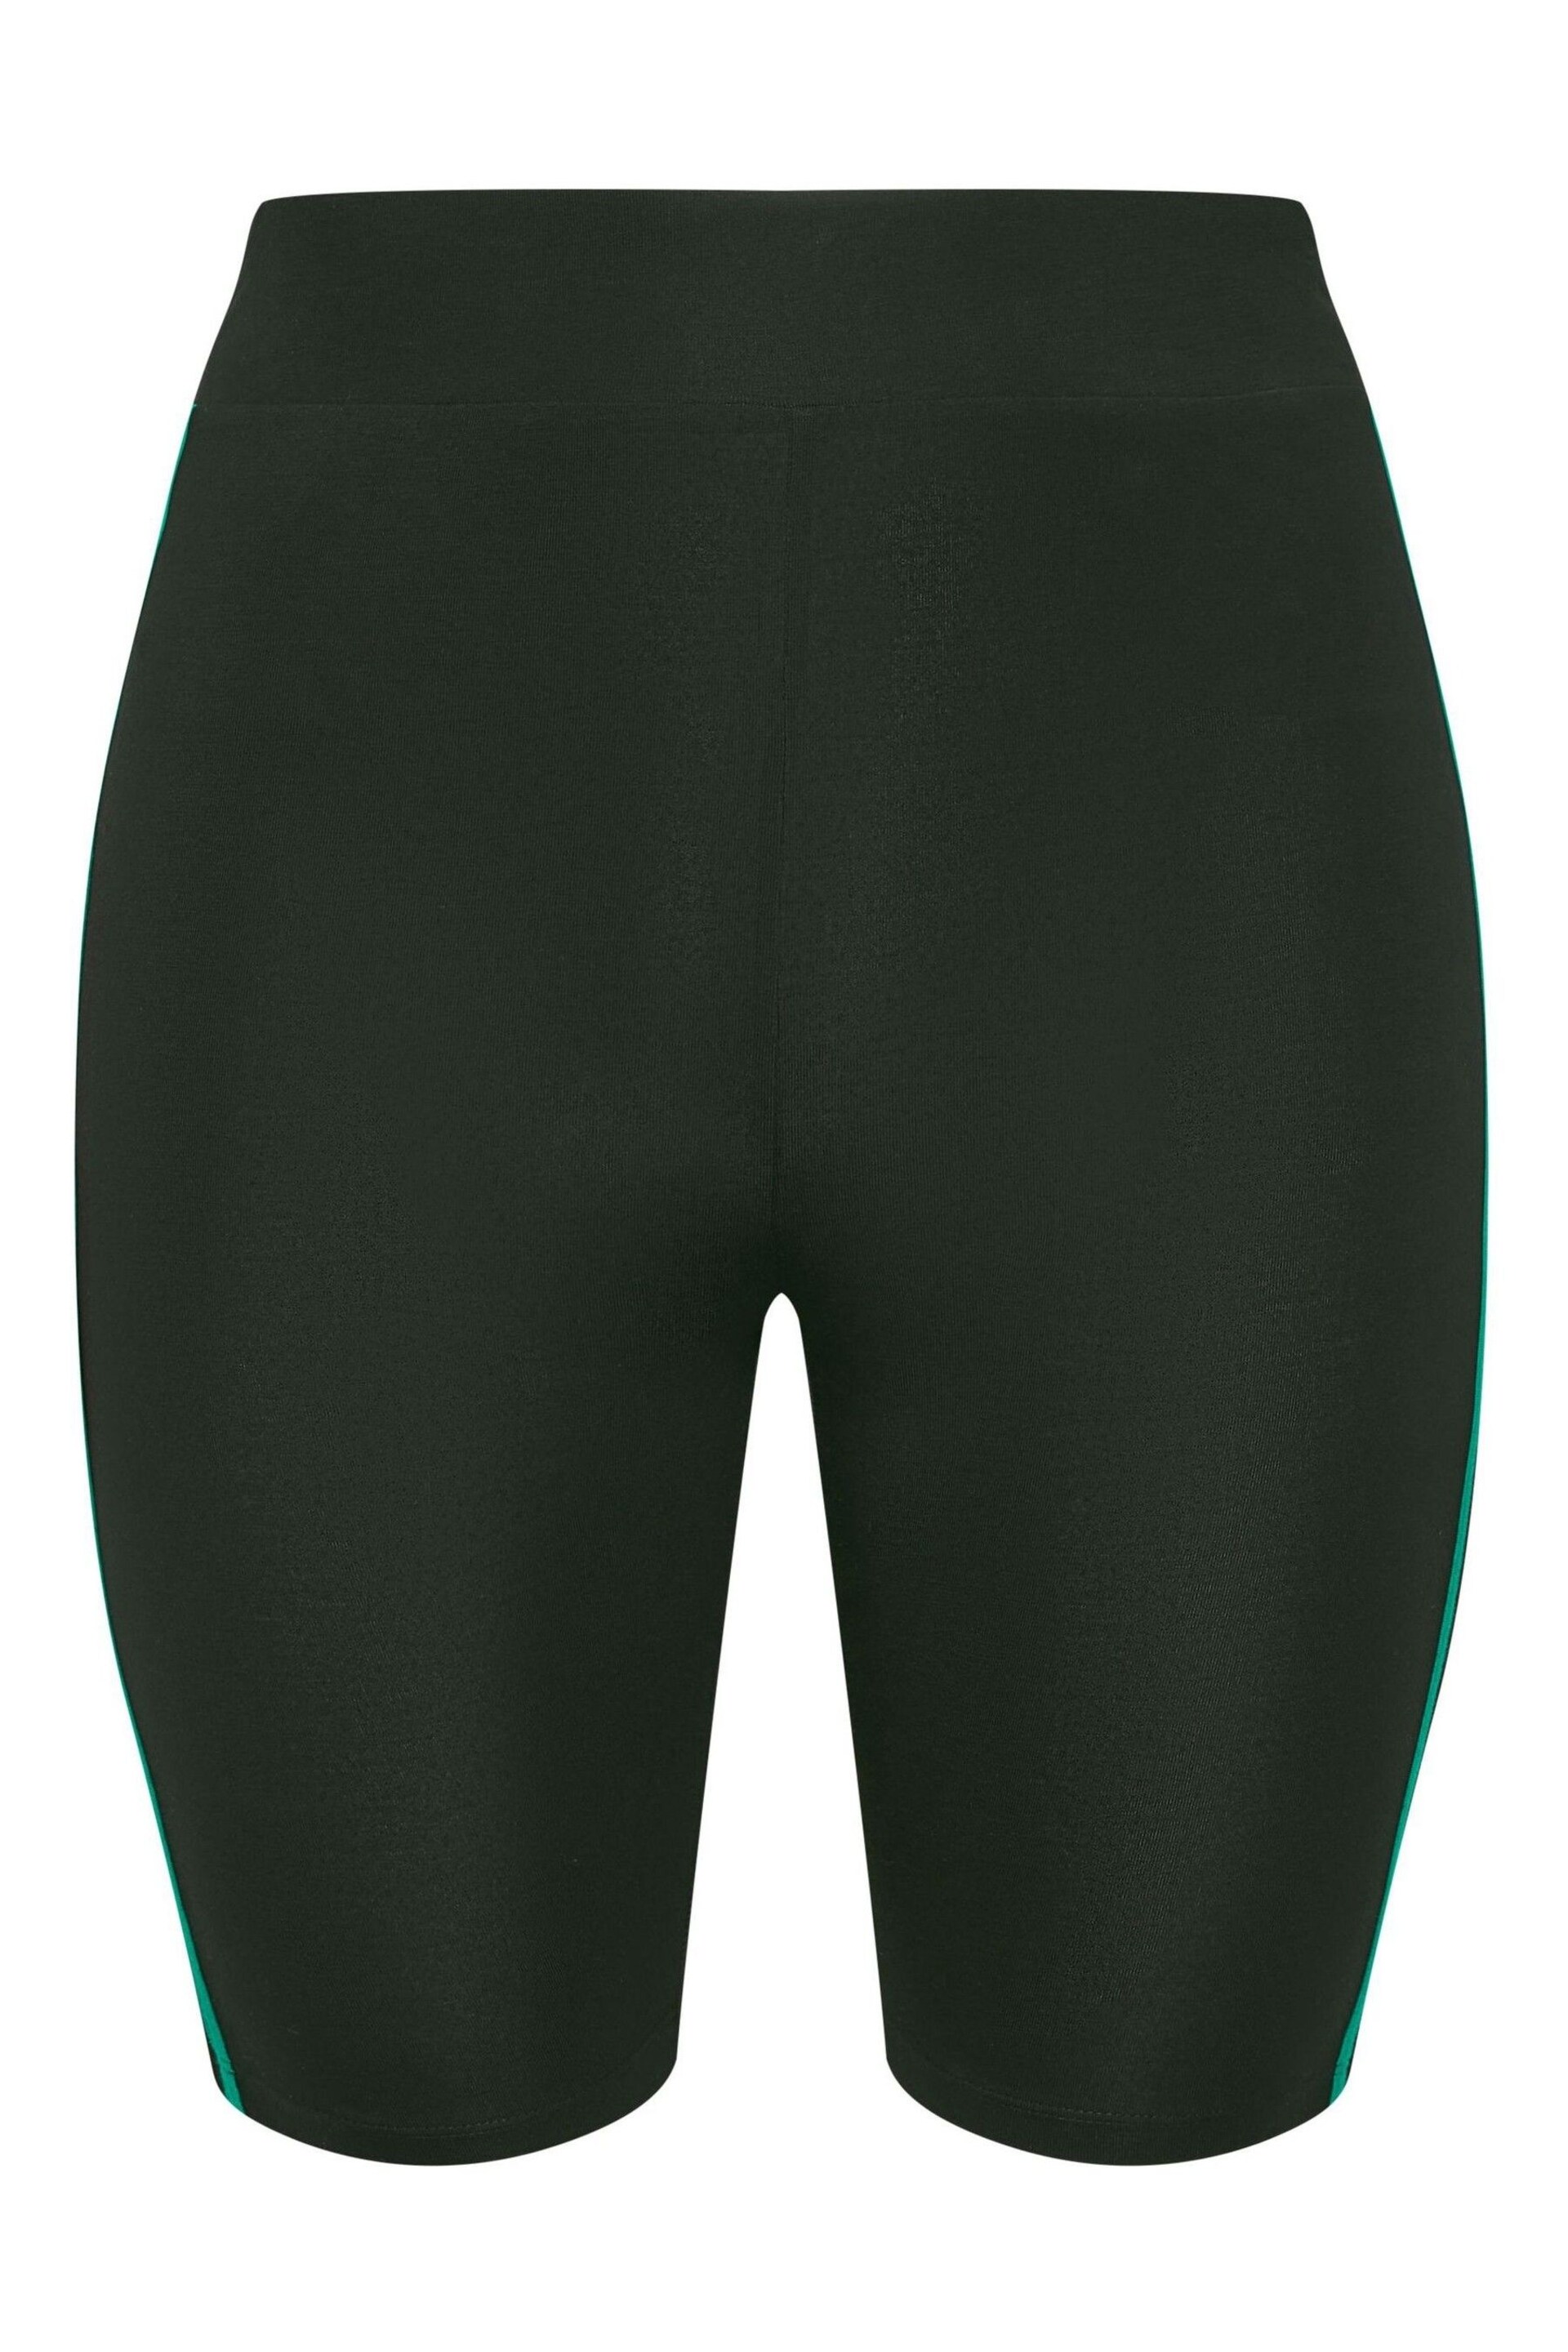 Yours Curve Black YOURS ACTIVE Curve Black Side Stripe Shorts - Image 5 of 6